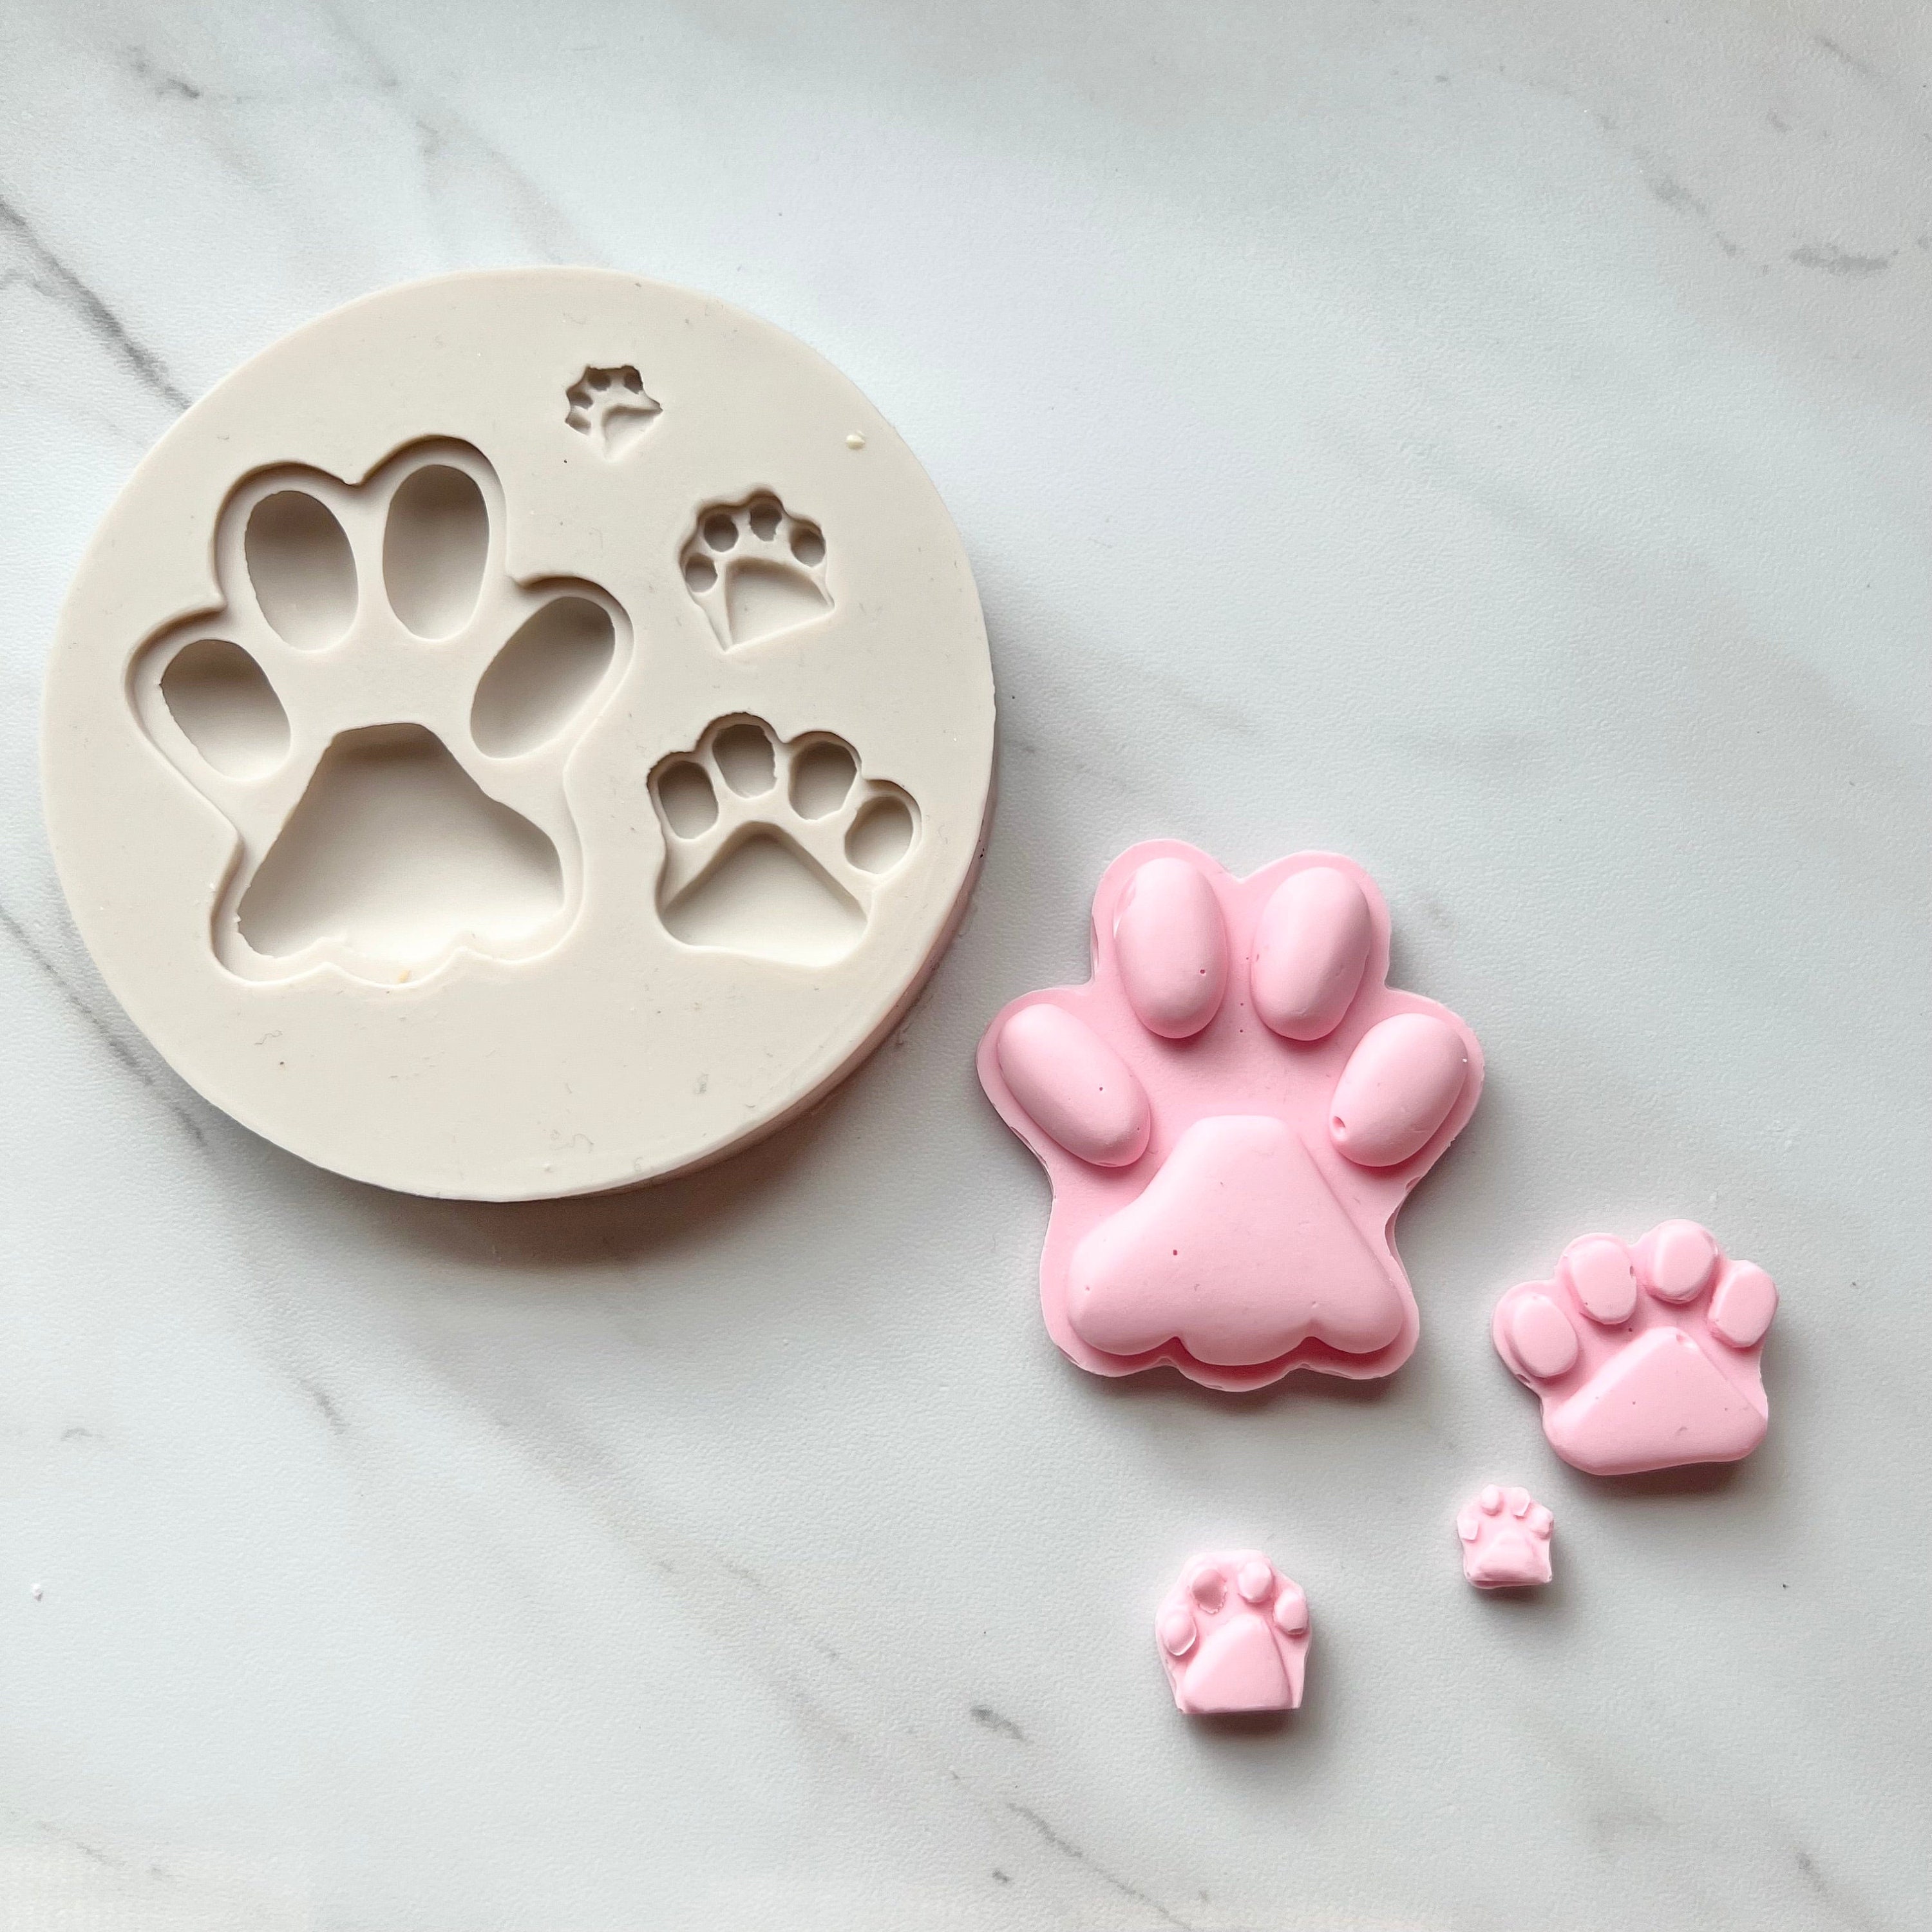 2 Pack Value Silicone Molds Mini Pet Paw Print Animal Paw Print for  Homemade Dog Treats, Baking Chocolate Candy, Oven Microwave Freezer Safe  (Mini Paw